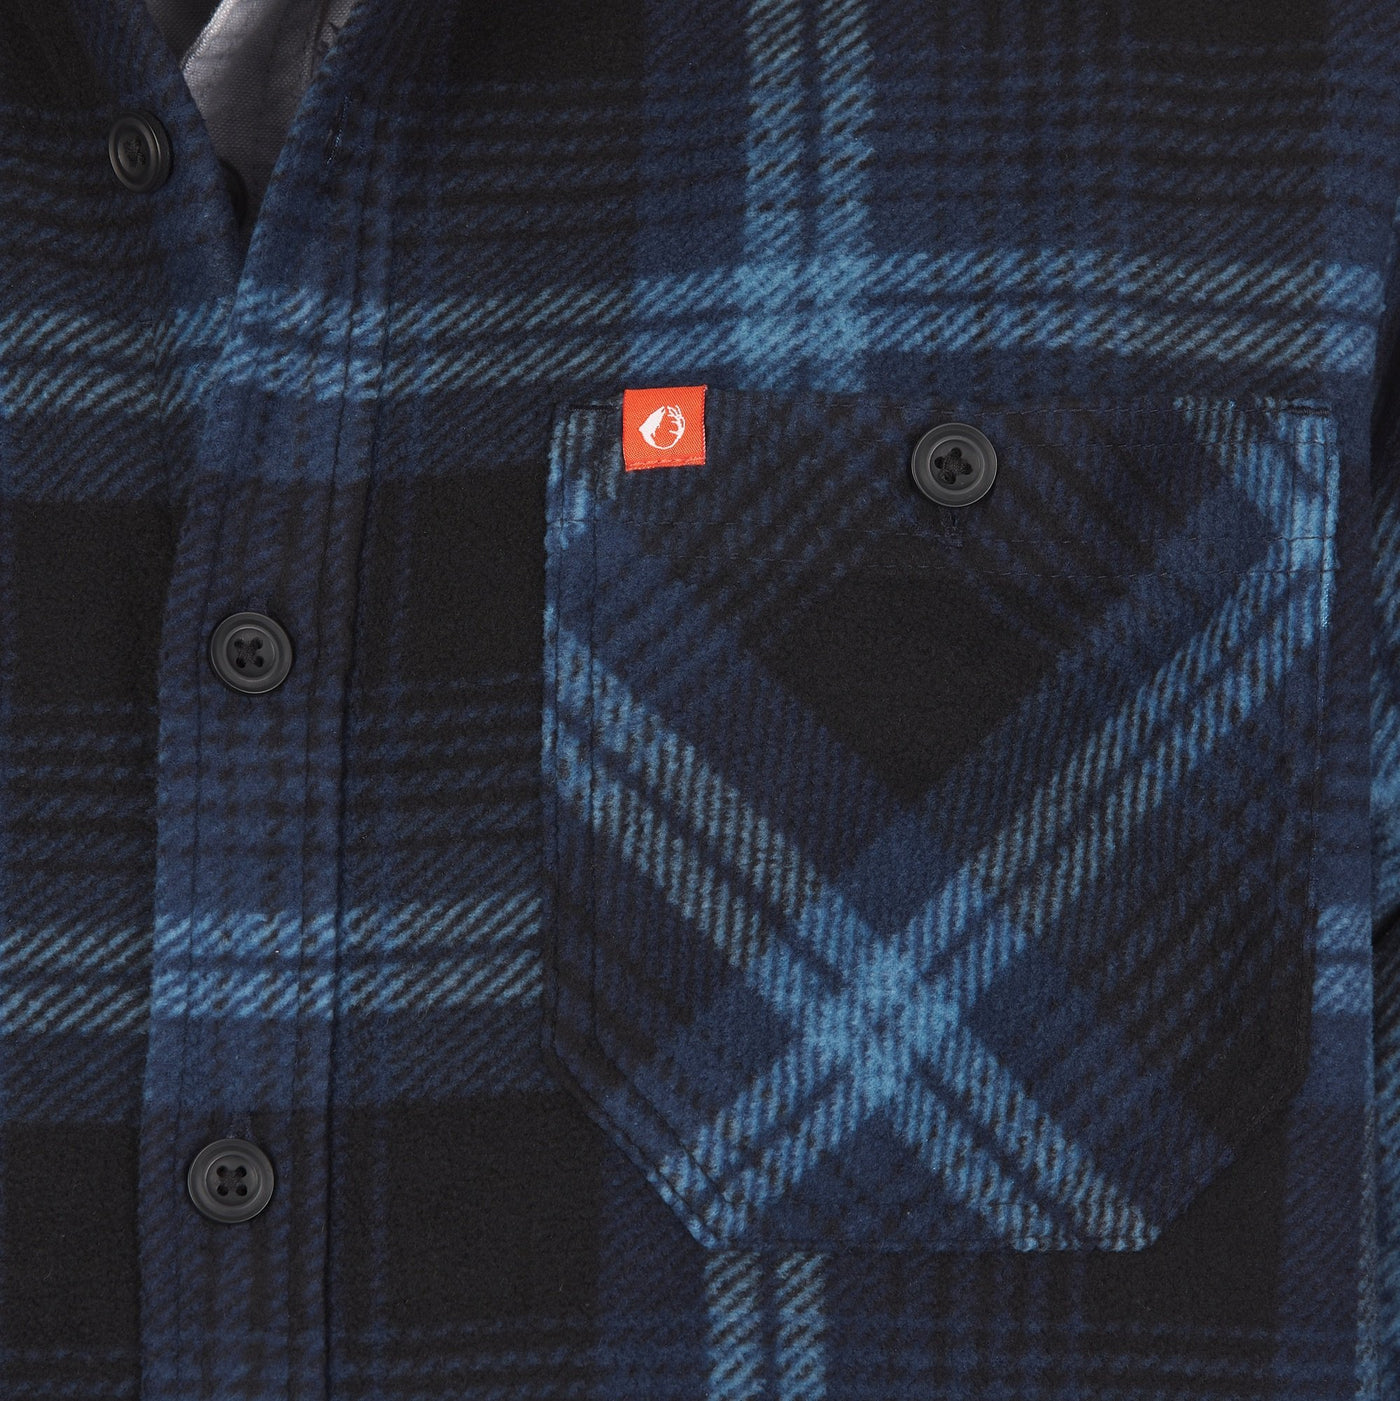 Bonded Sherpa Fleece-Lined Flannel Print Shirt Jacket from The American Outdoorsman